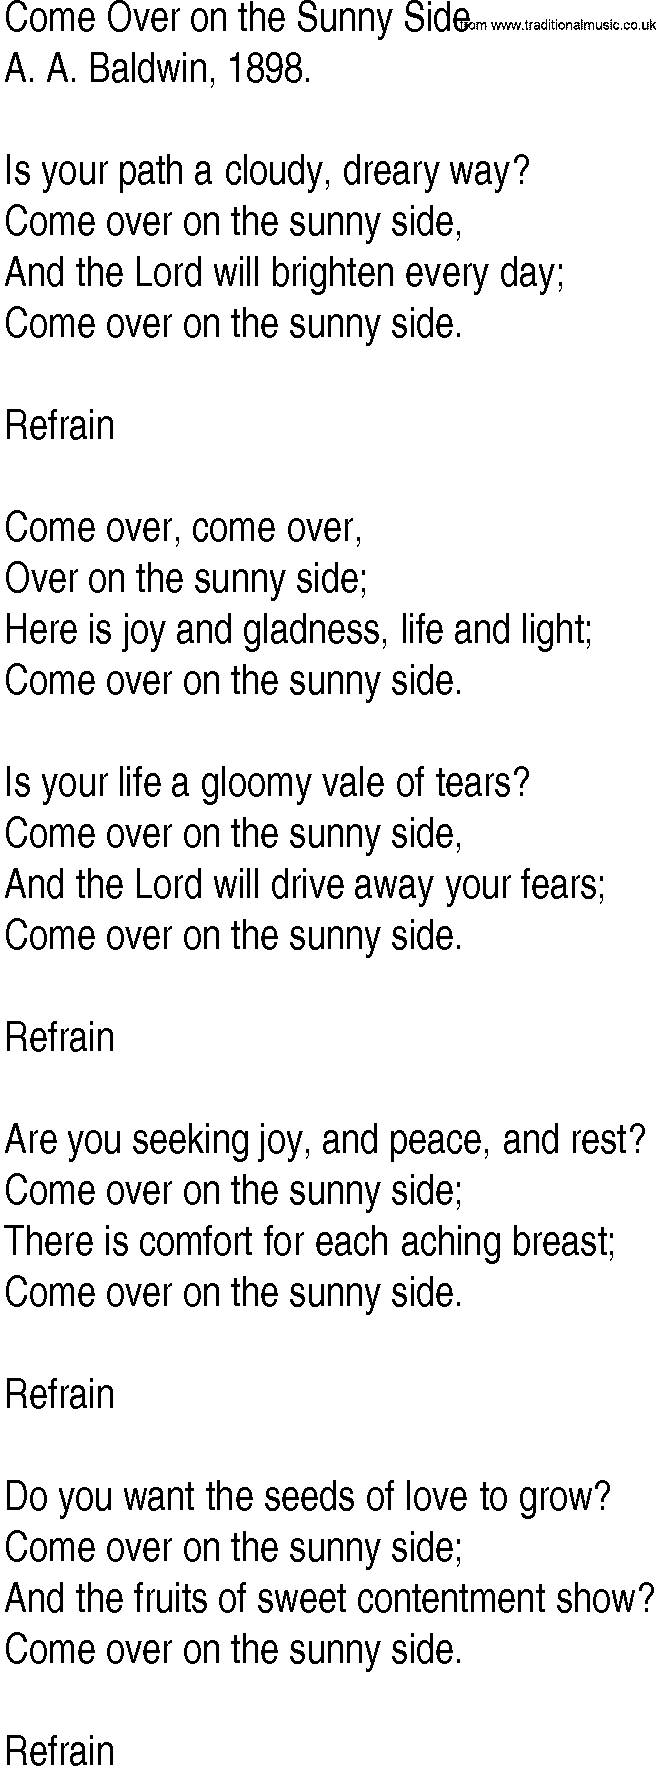 Hymn and Gospel Song: Come Over on the Sunny Side by A A Baldwin lyrics